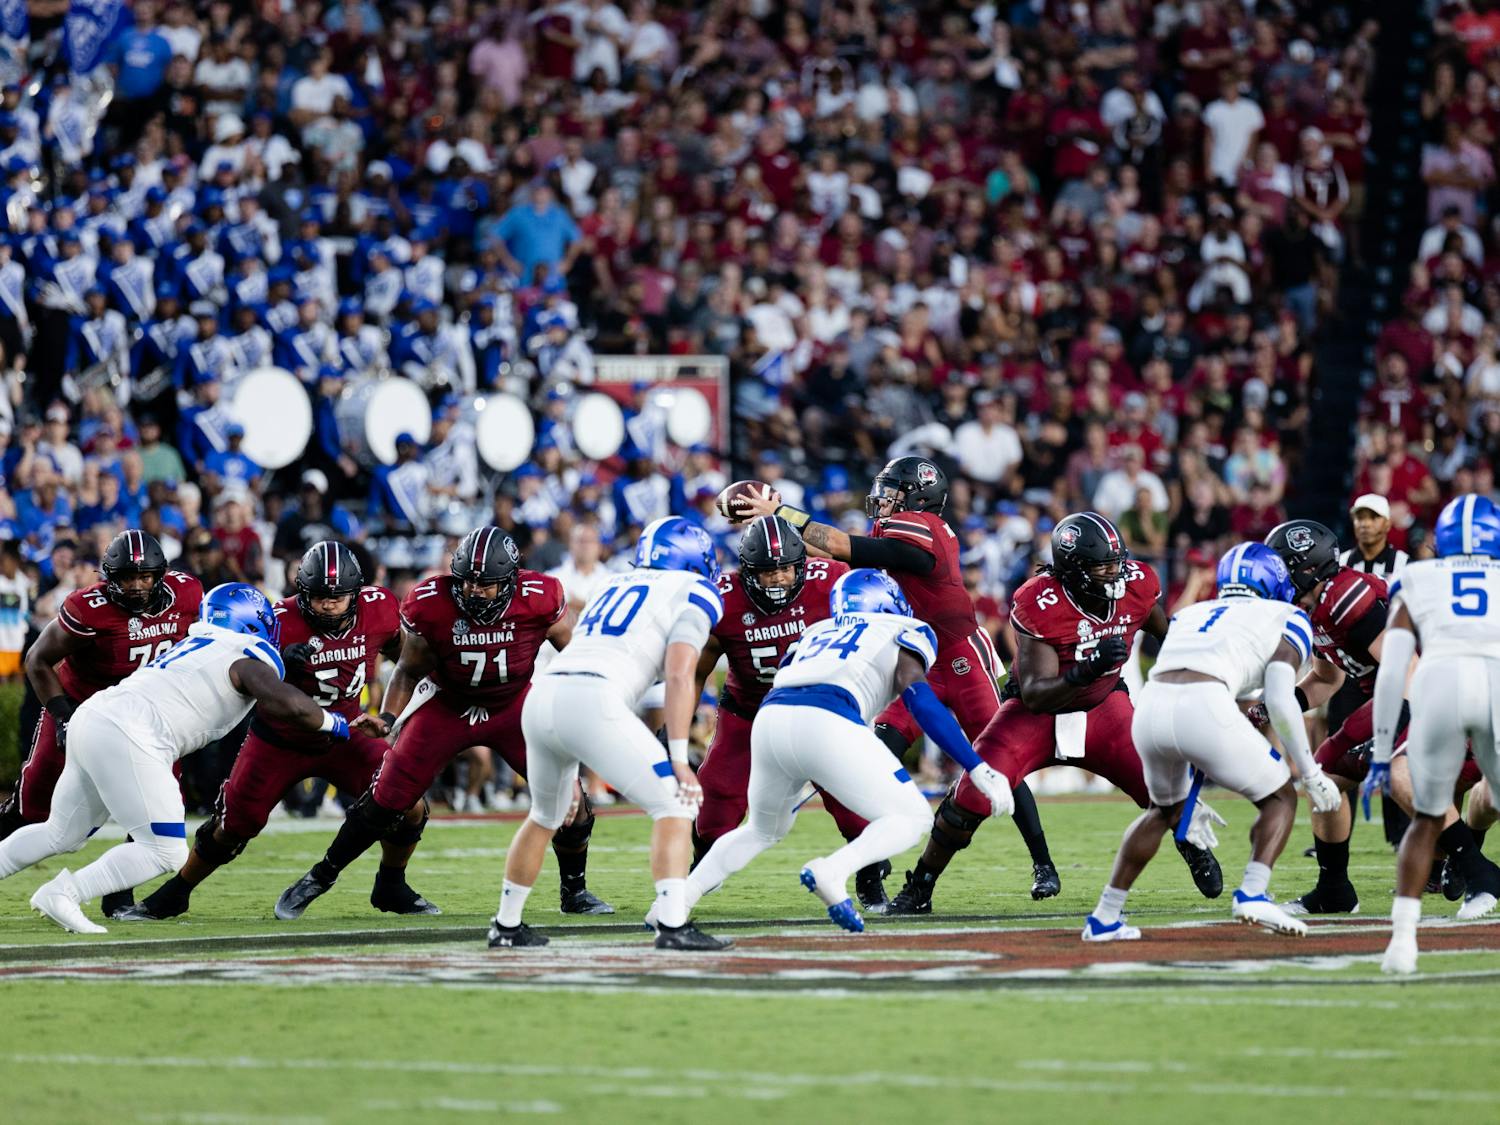 FILE — Junior quarterback Spencer Rattler passes off the ball during the South Carolina and Georgia State game in Columbia, S.C., on Sept. 3, 2022. The Gamecocks won 35-14 against the Panthers.